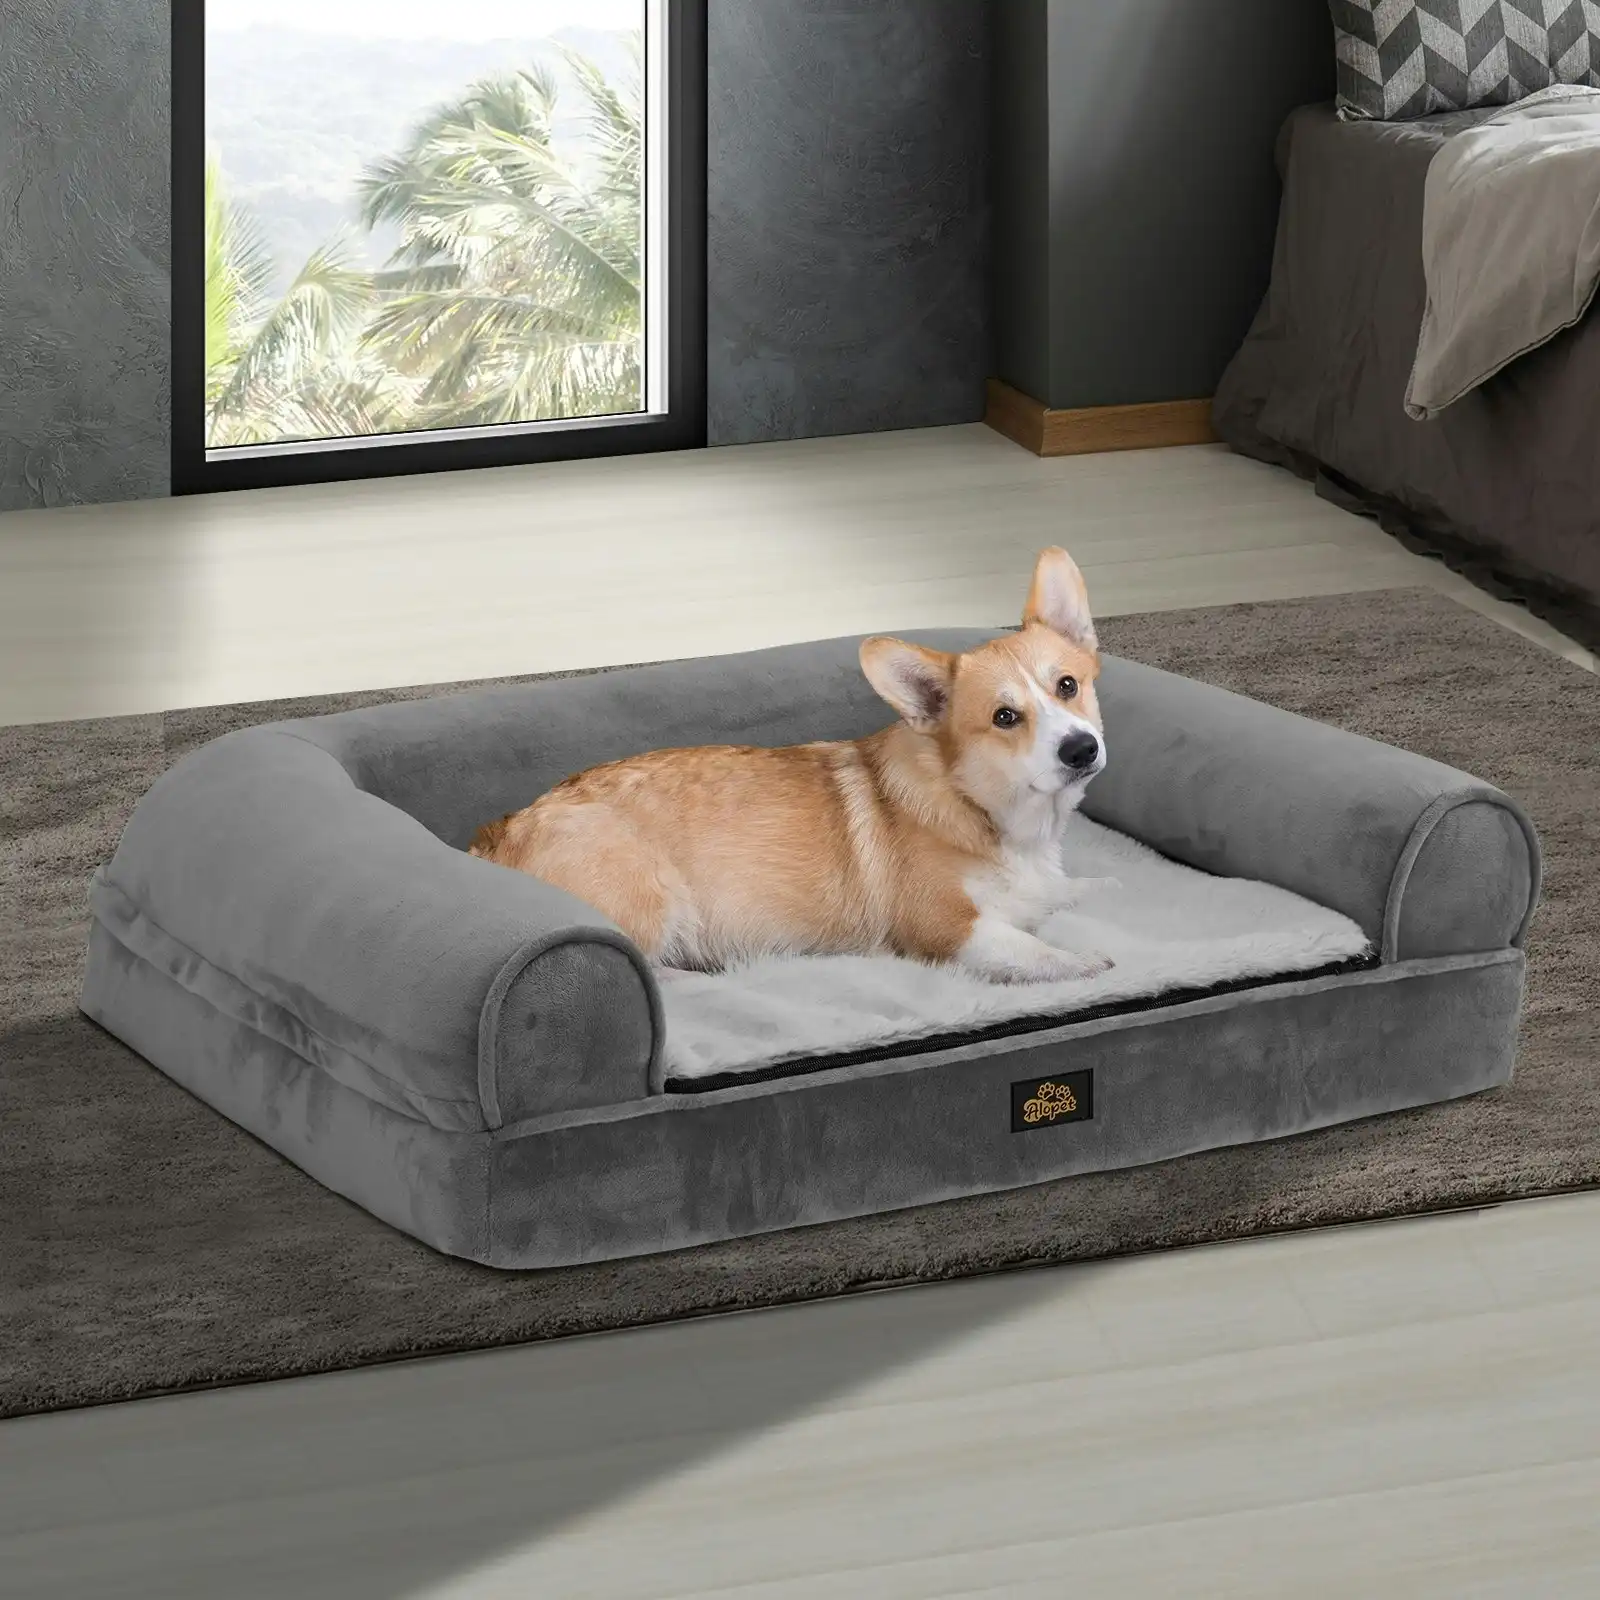 Alopet Dog Calming Bed Pet Orthopedic Memory Foam Sofa Washable Removable Cover Extra Large